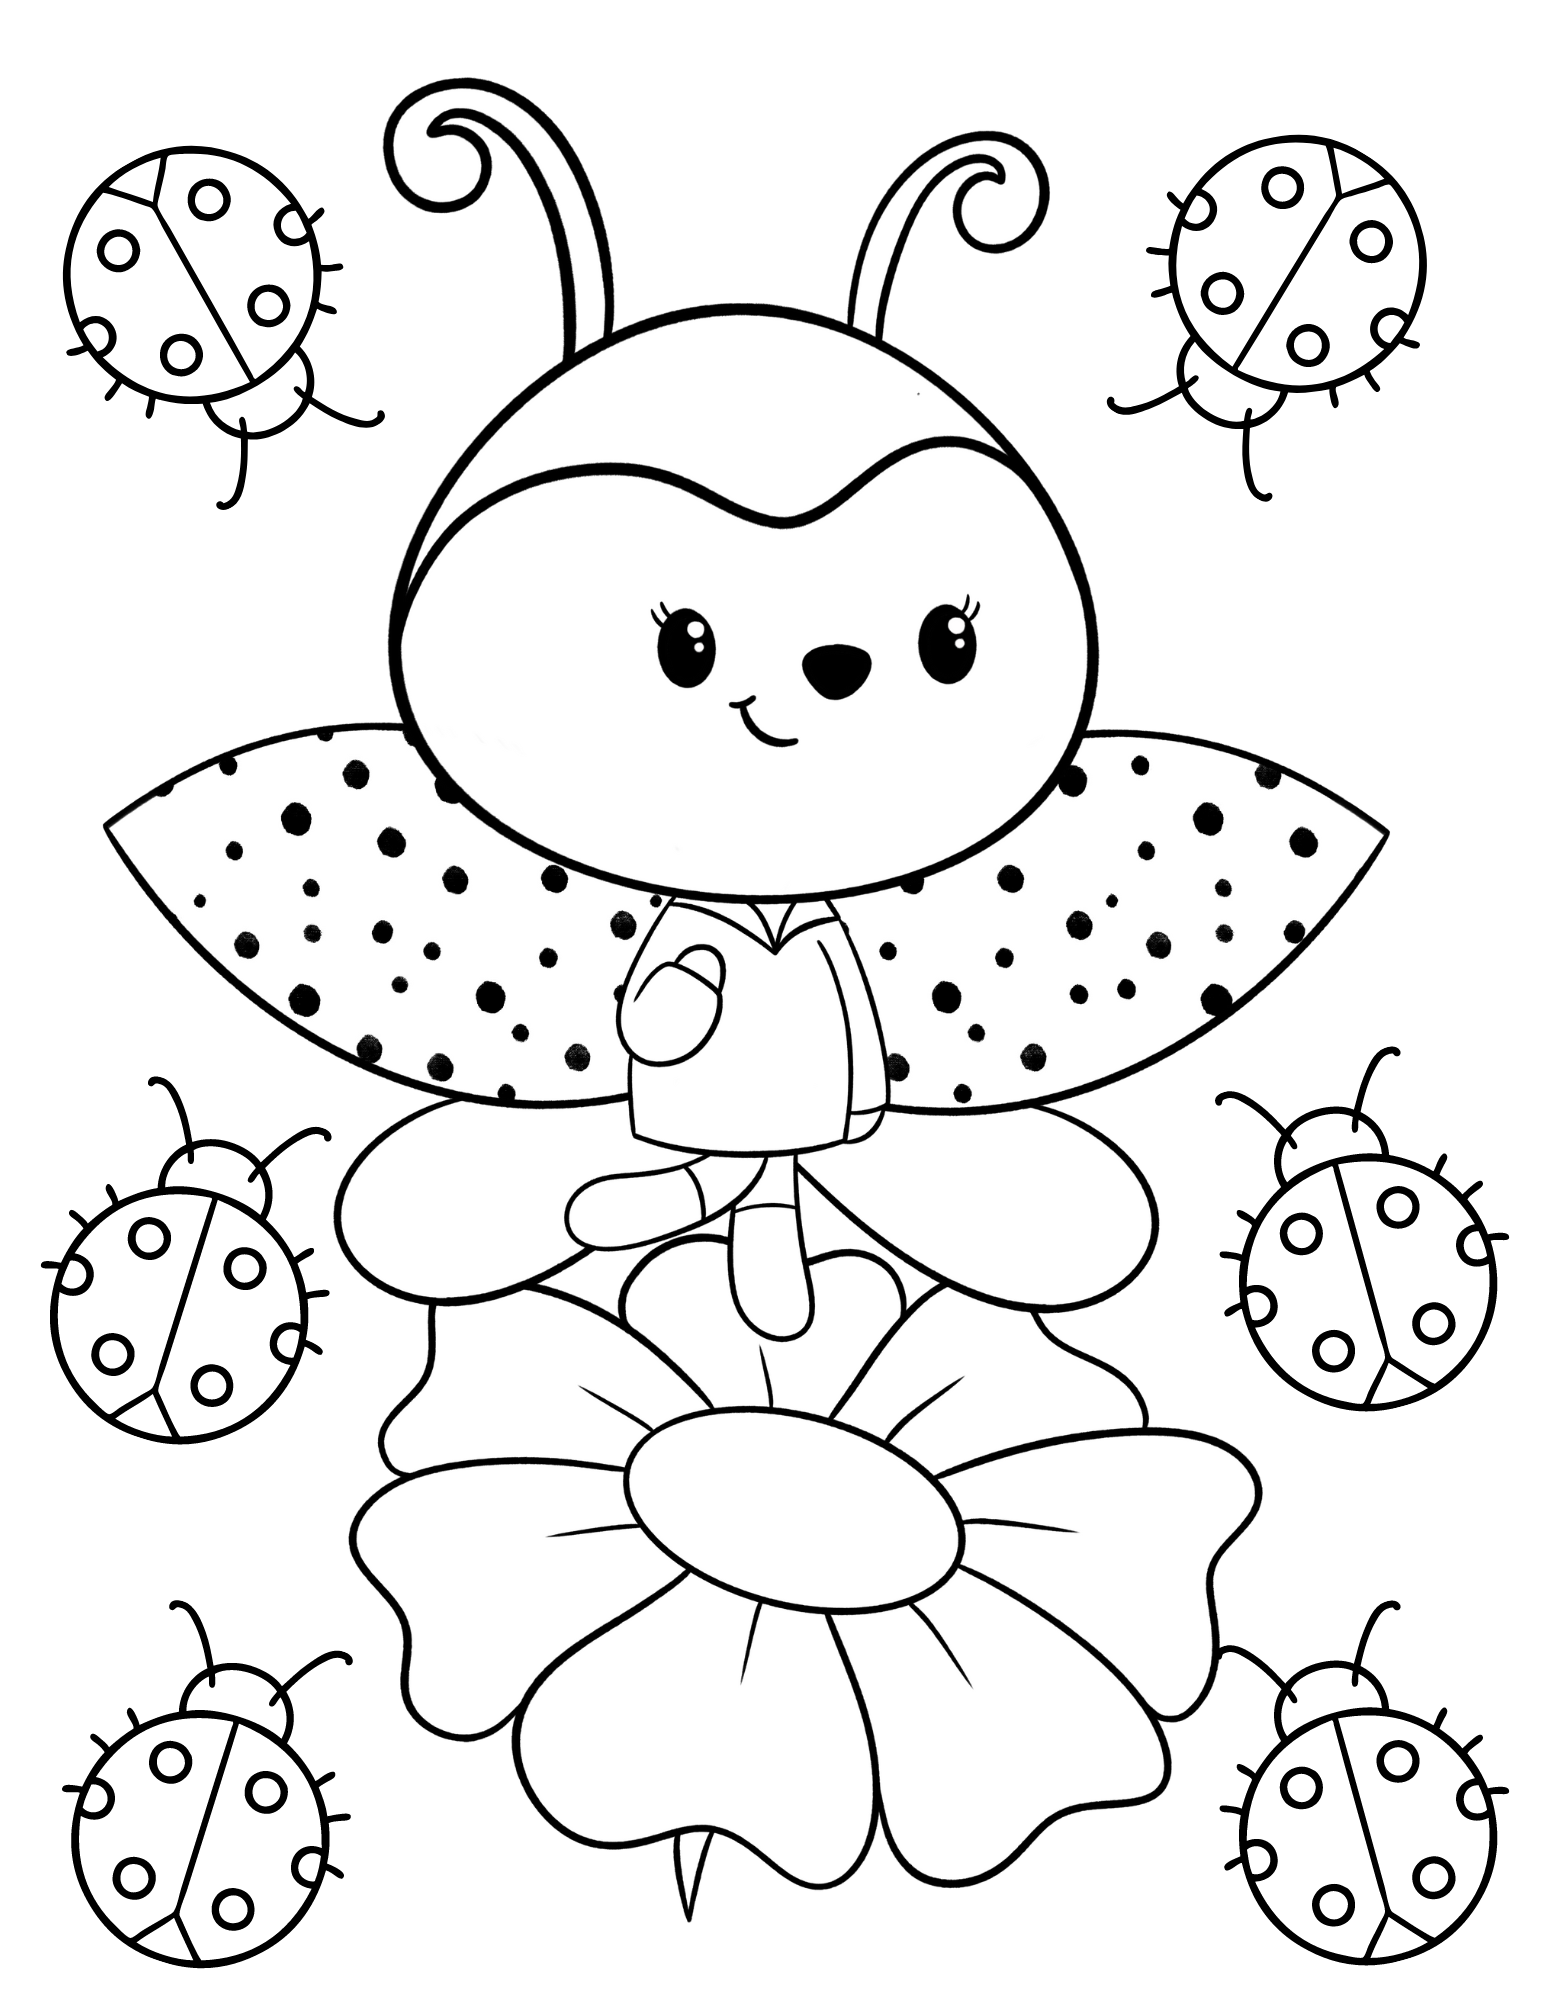 Free ladybug coloring pages for kids and adults